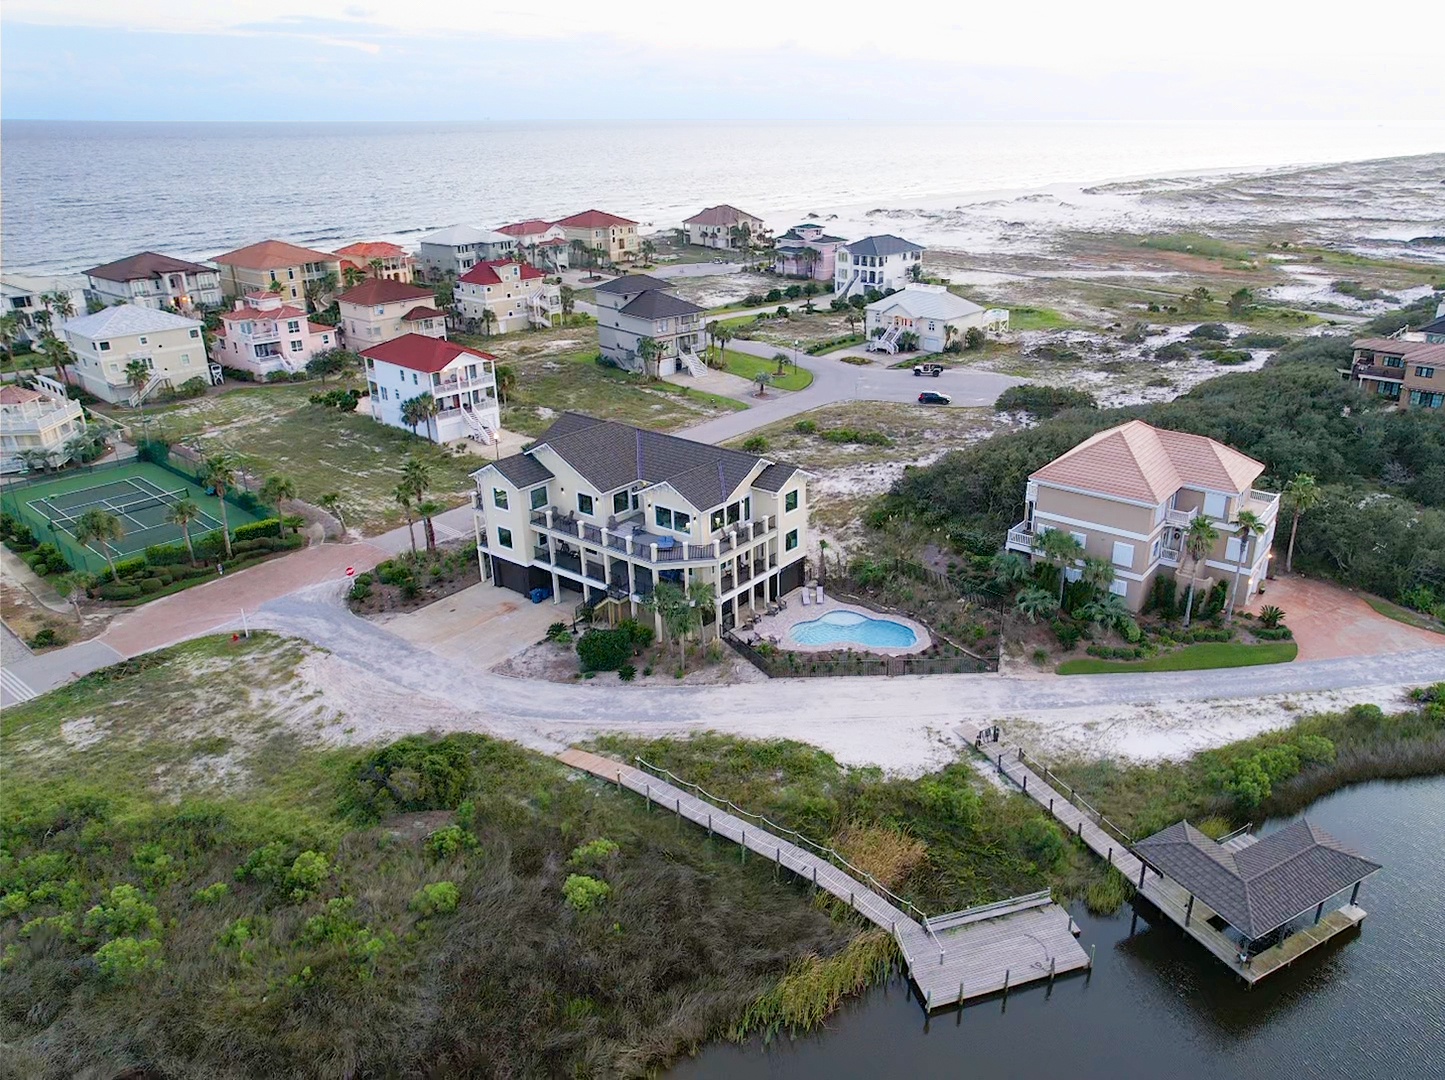 Birds eye view of home, lagoon and Gulf